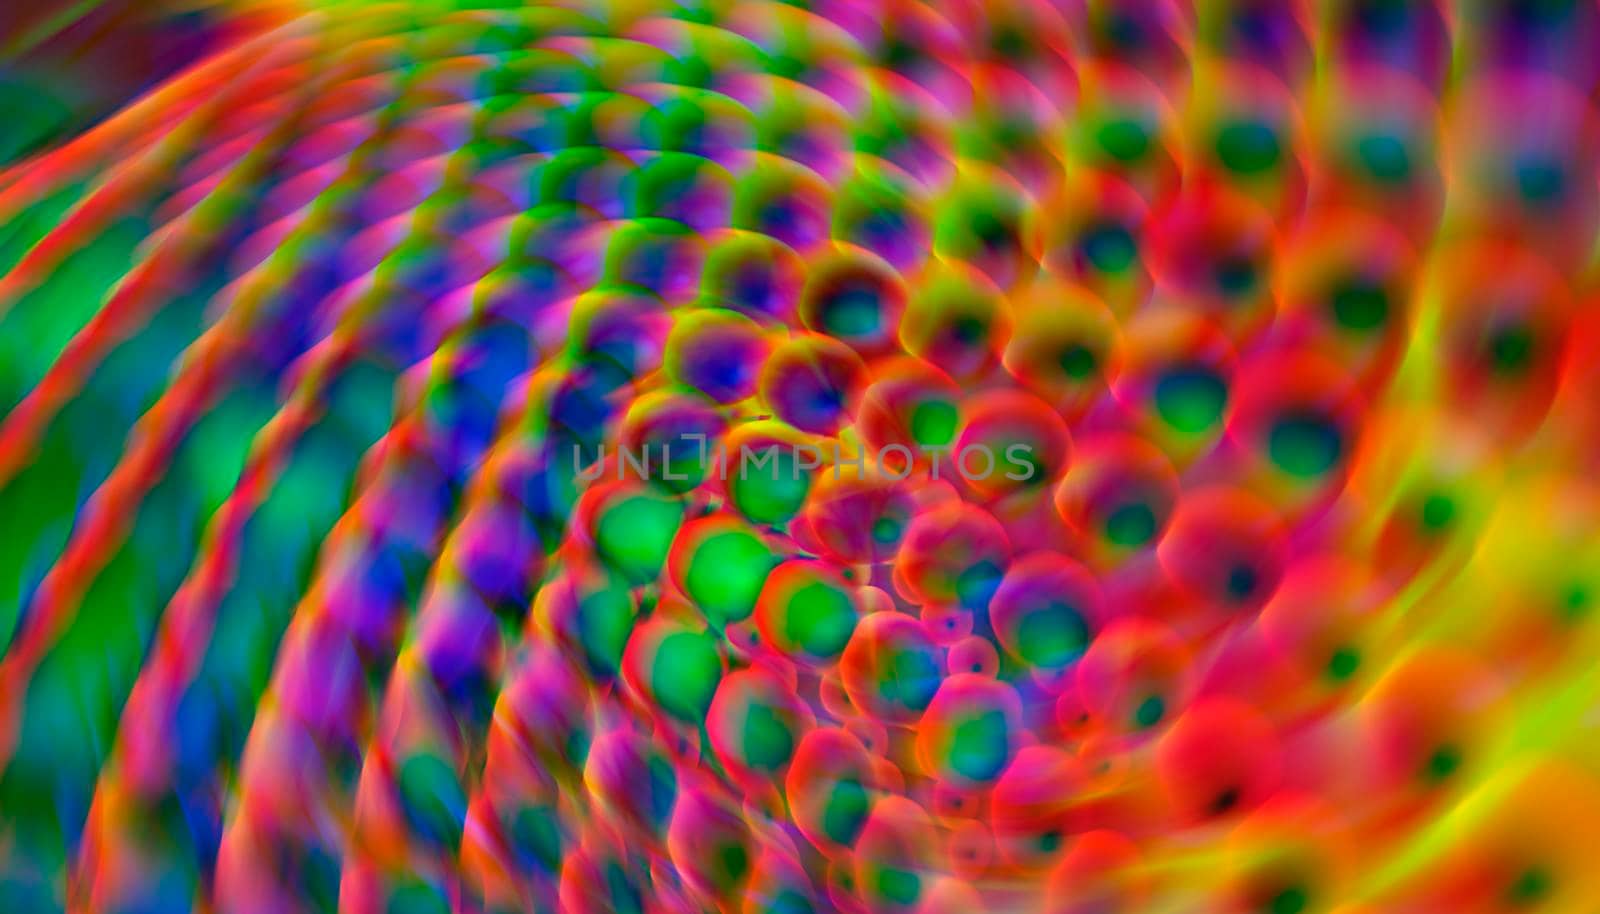 Abstract background with colorful bubbles by Vvicca